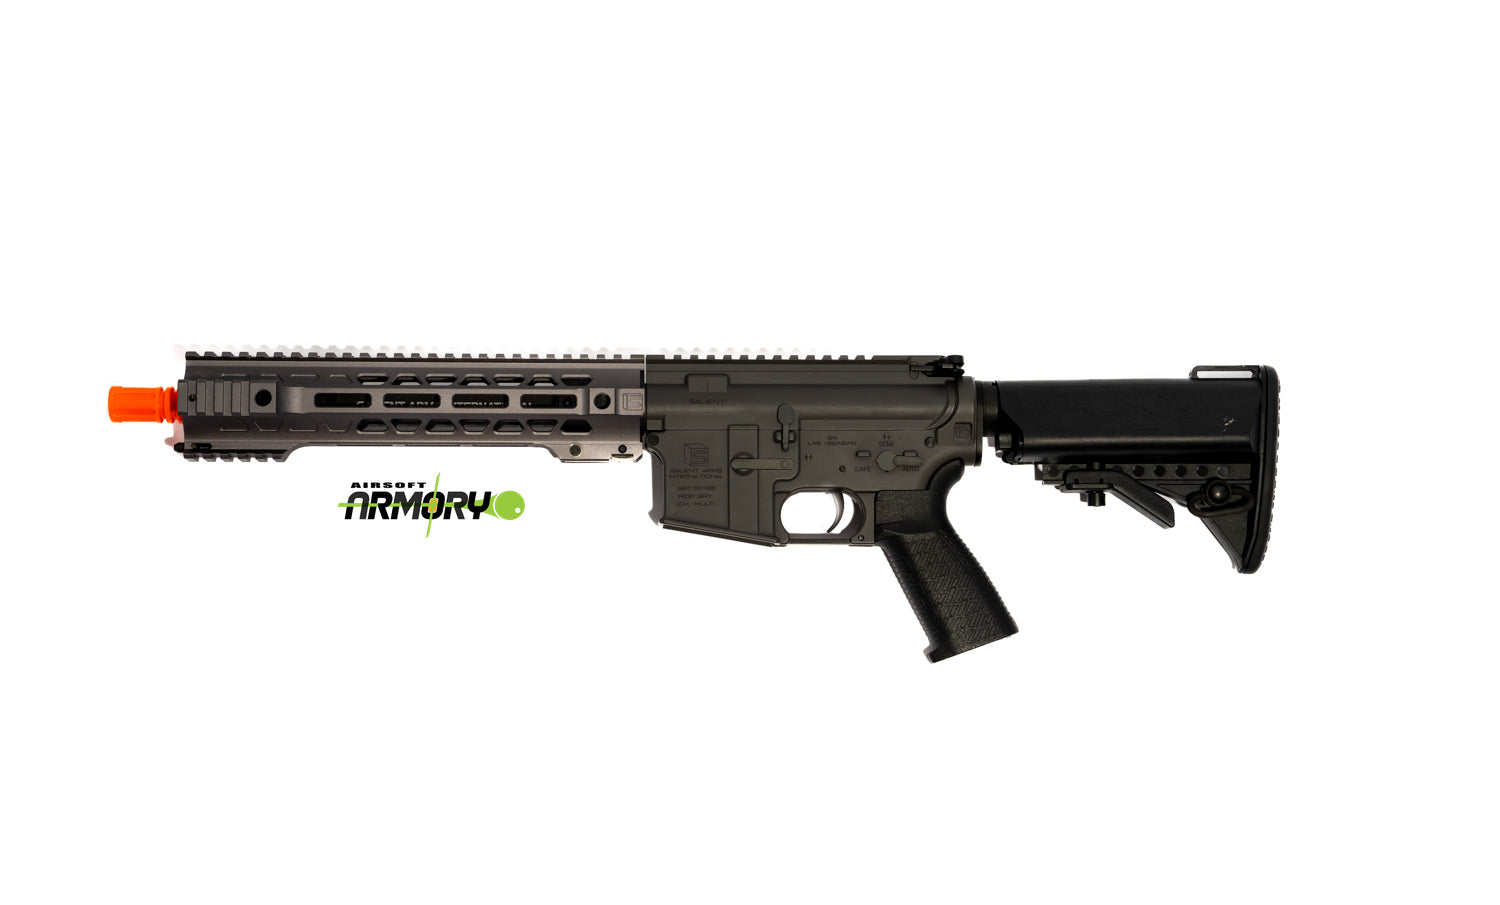 EMG SAI GRY Gen. 2 Forge Style Receiver AEG Airsoft Training Rifle GATE ASTER Programmable MOSFET (Model: SBR / Grey)